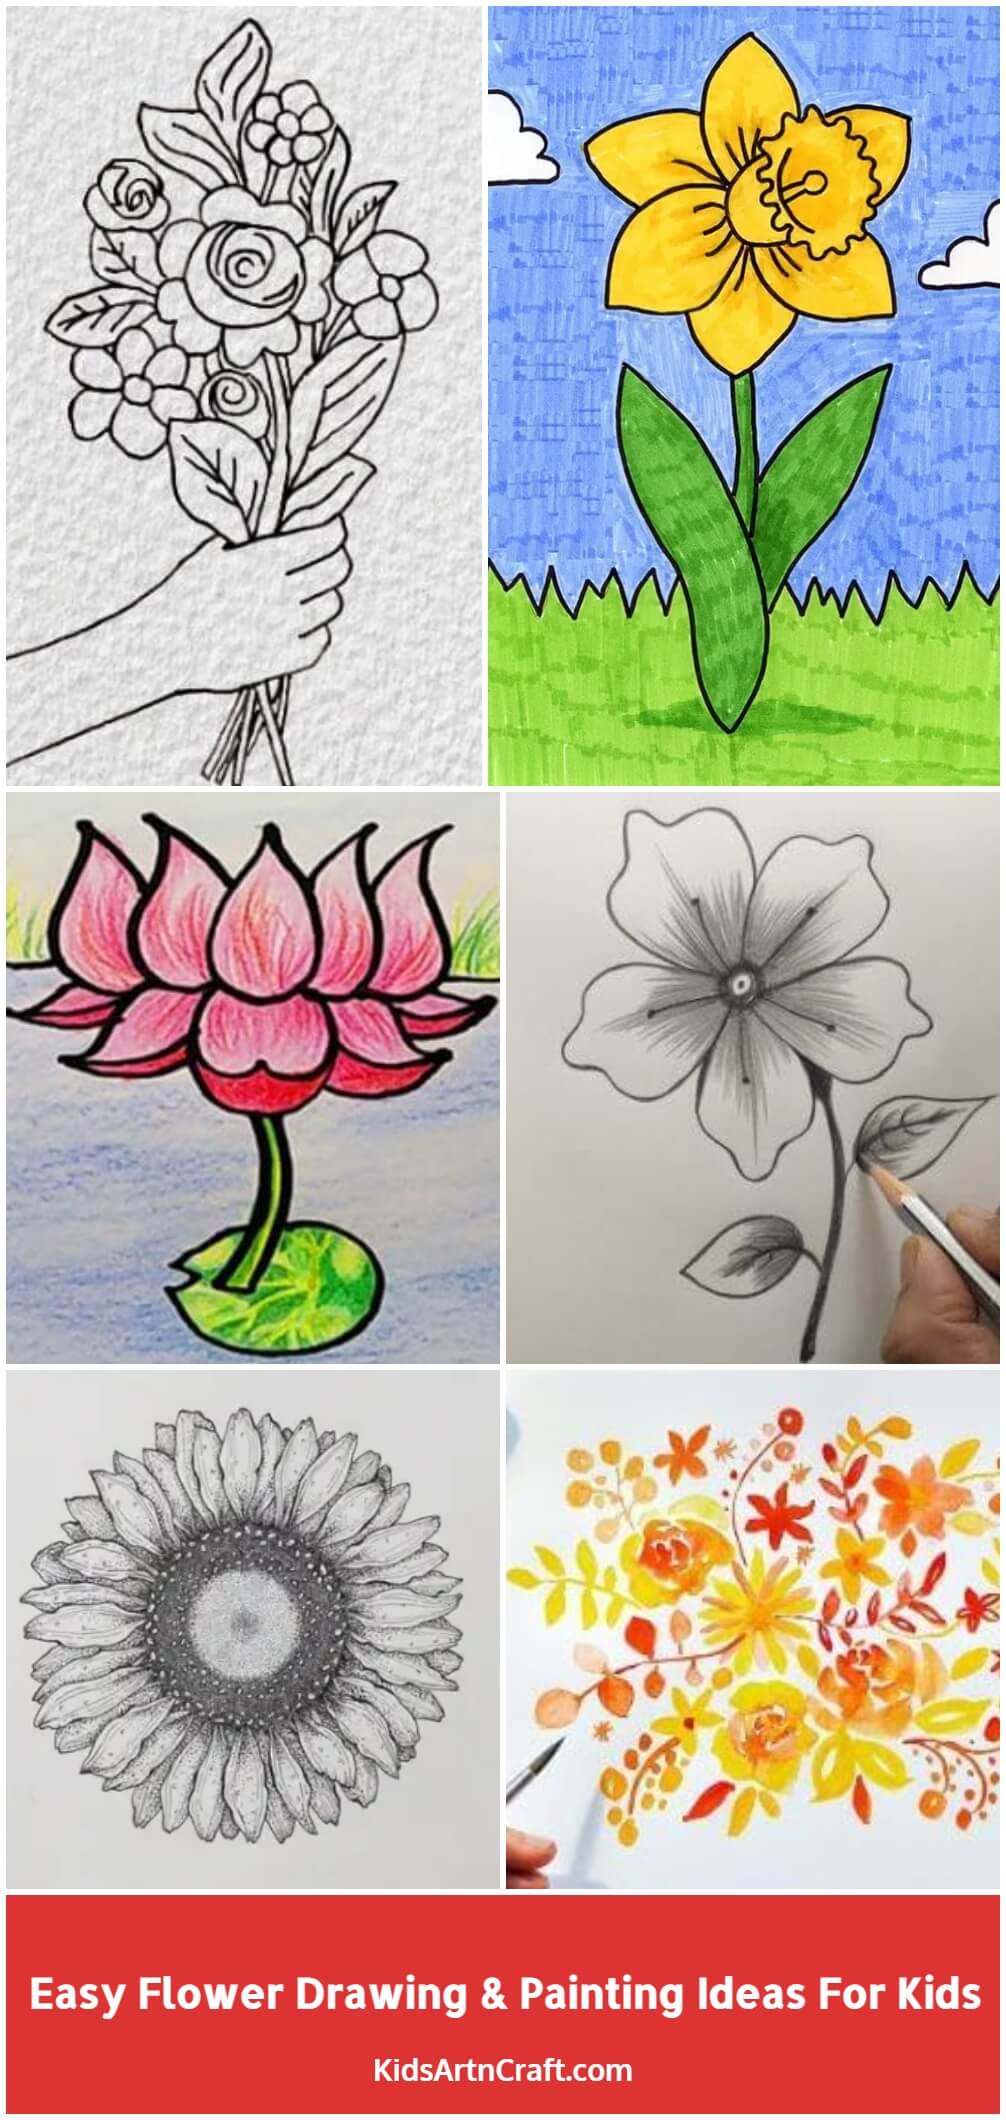 Easy Flower Drawing & Painting Ideas For Kids